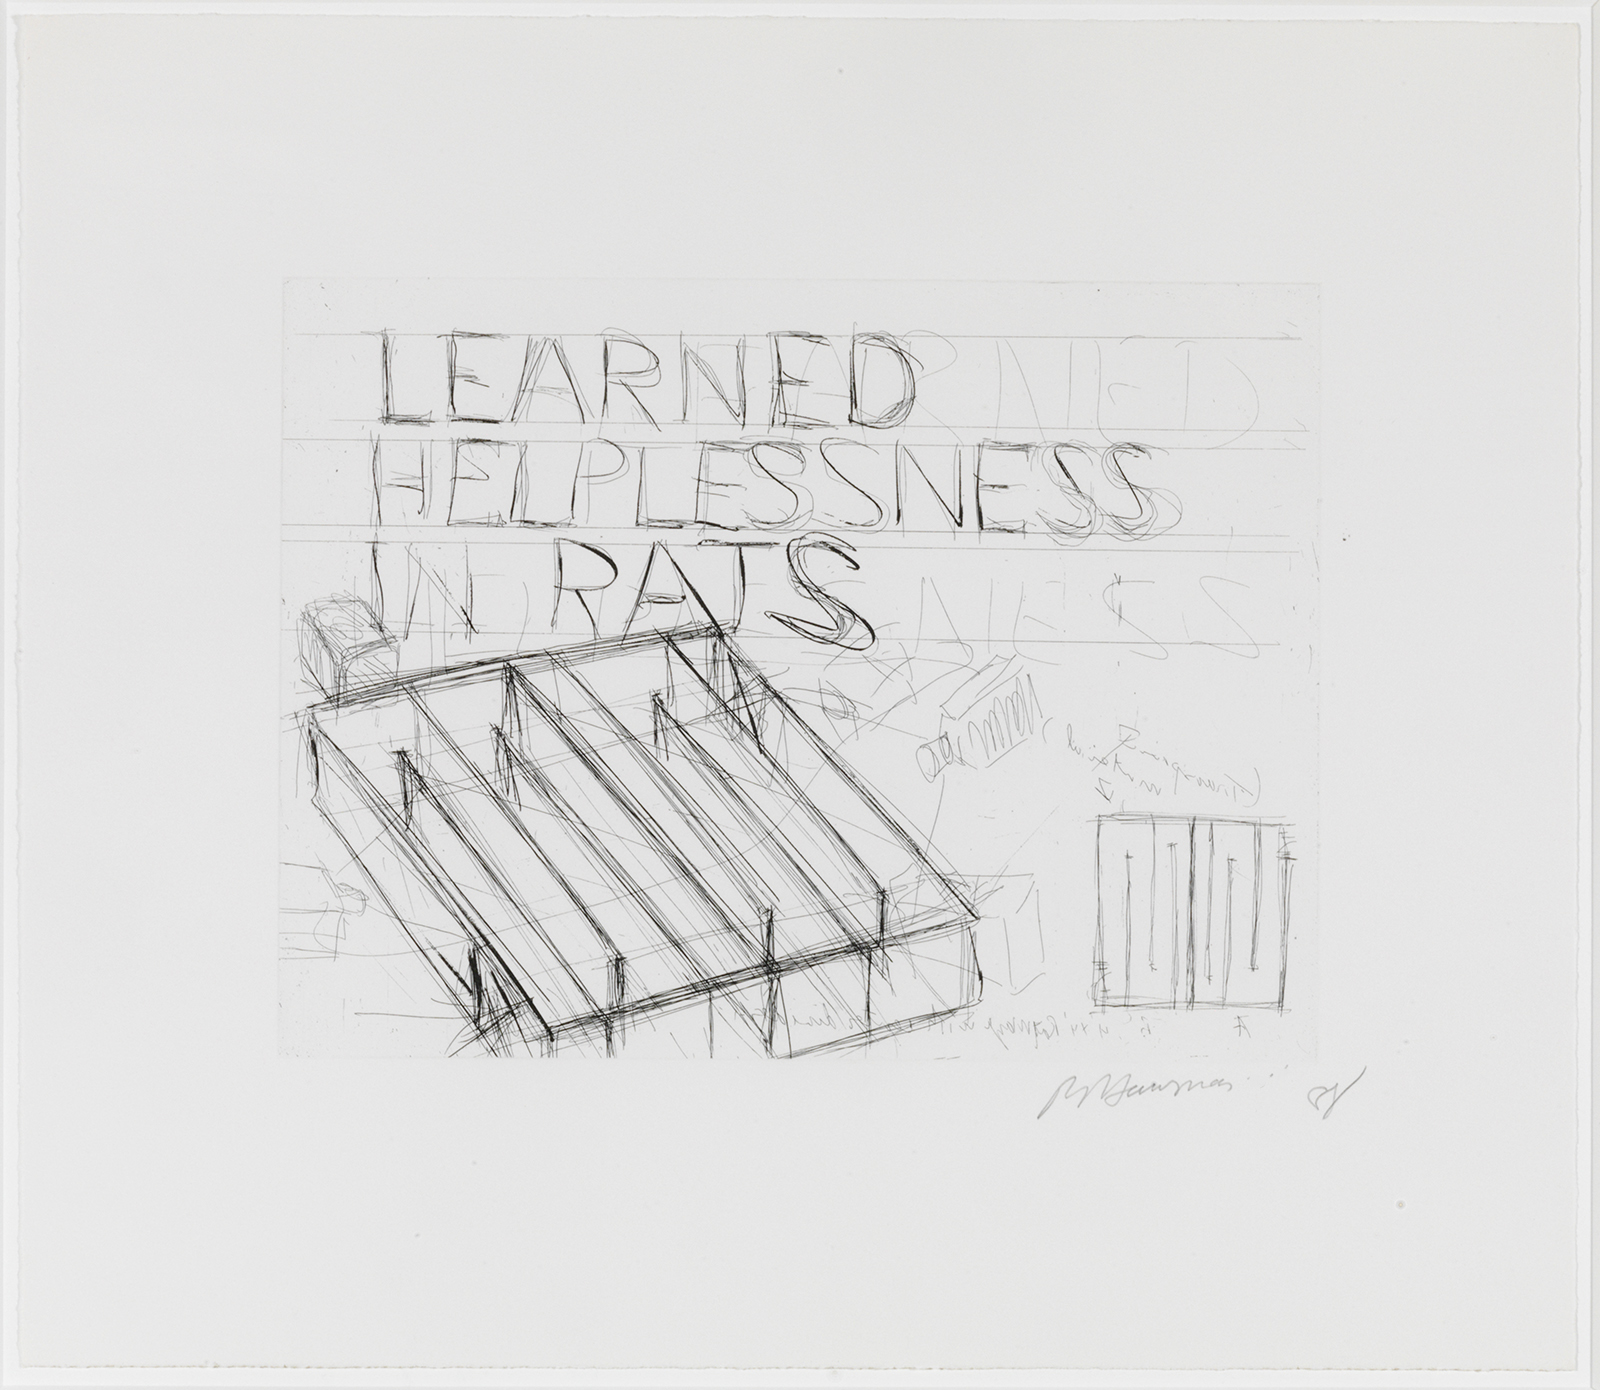 Learned Helplessness in Rats by Bruce Nauman